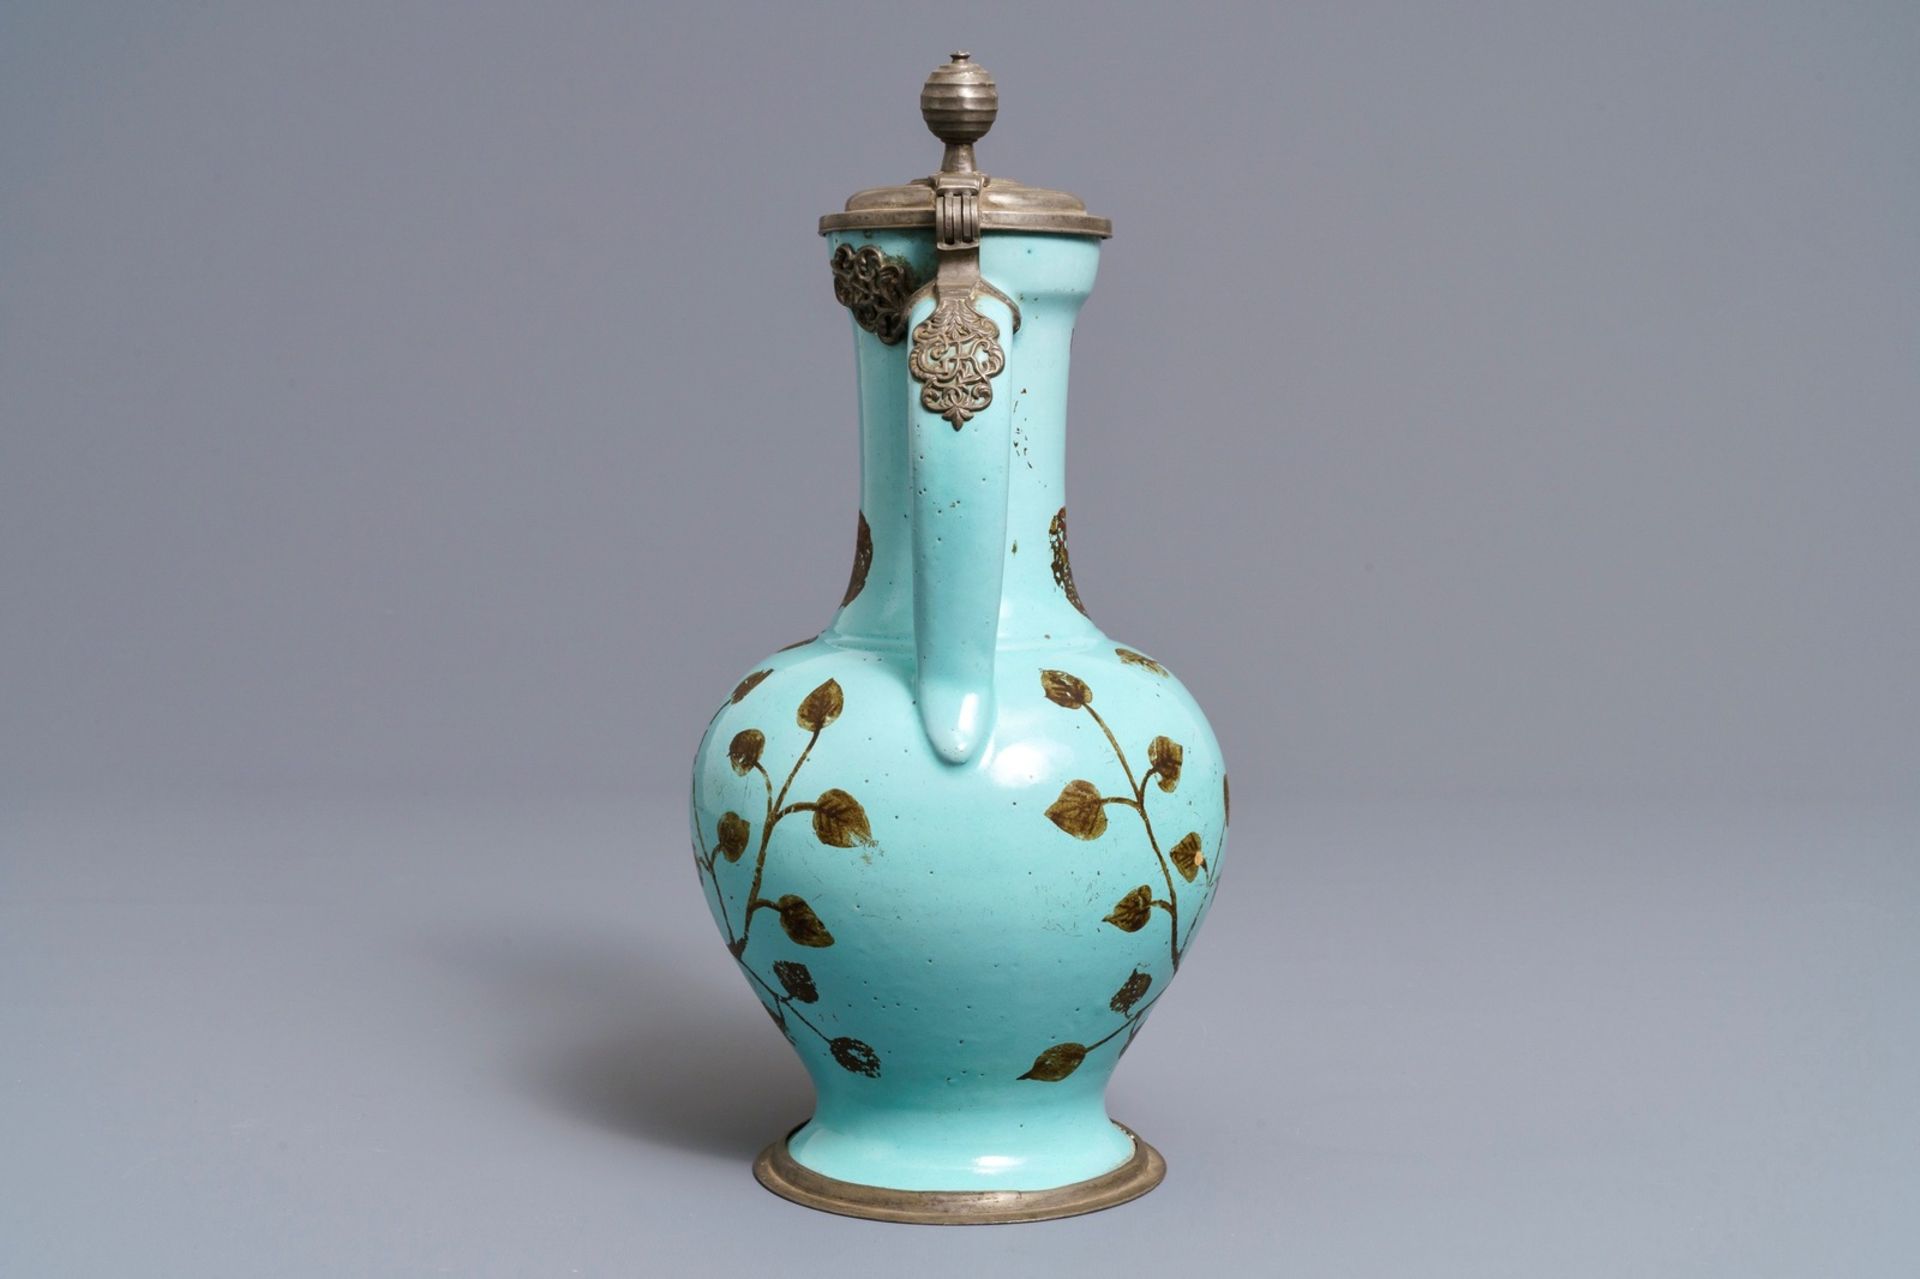 A German pewter-mounted turquoise ground ewer with birds among flowers, 17/18th C. - Image 5 of 8